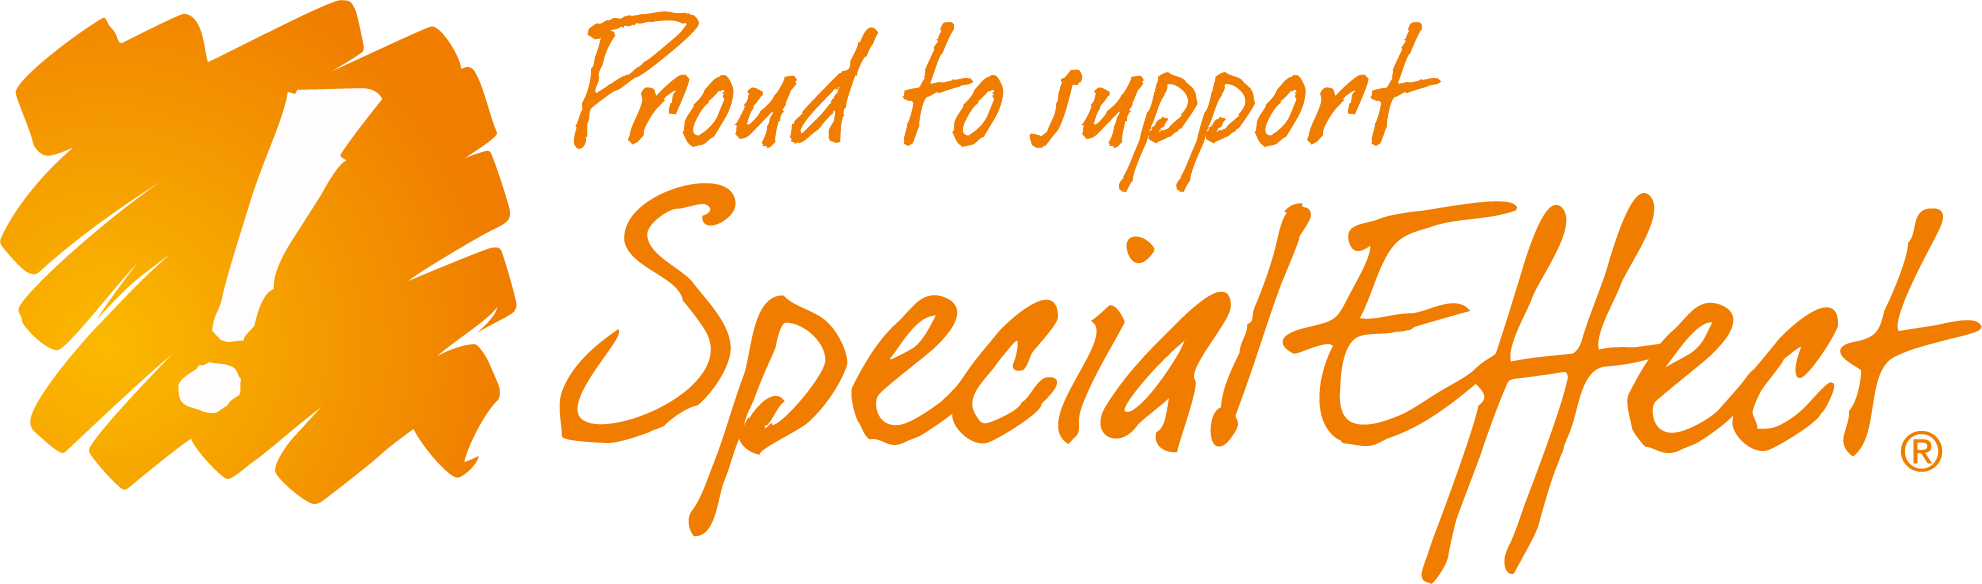 Proud to support SpecialEffect banner